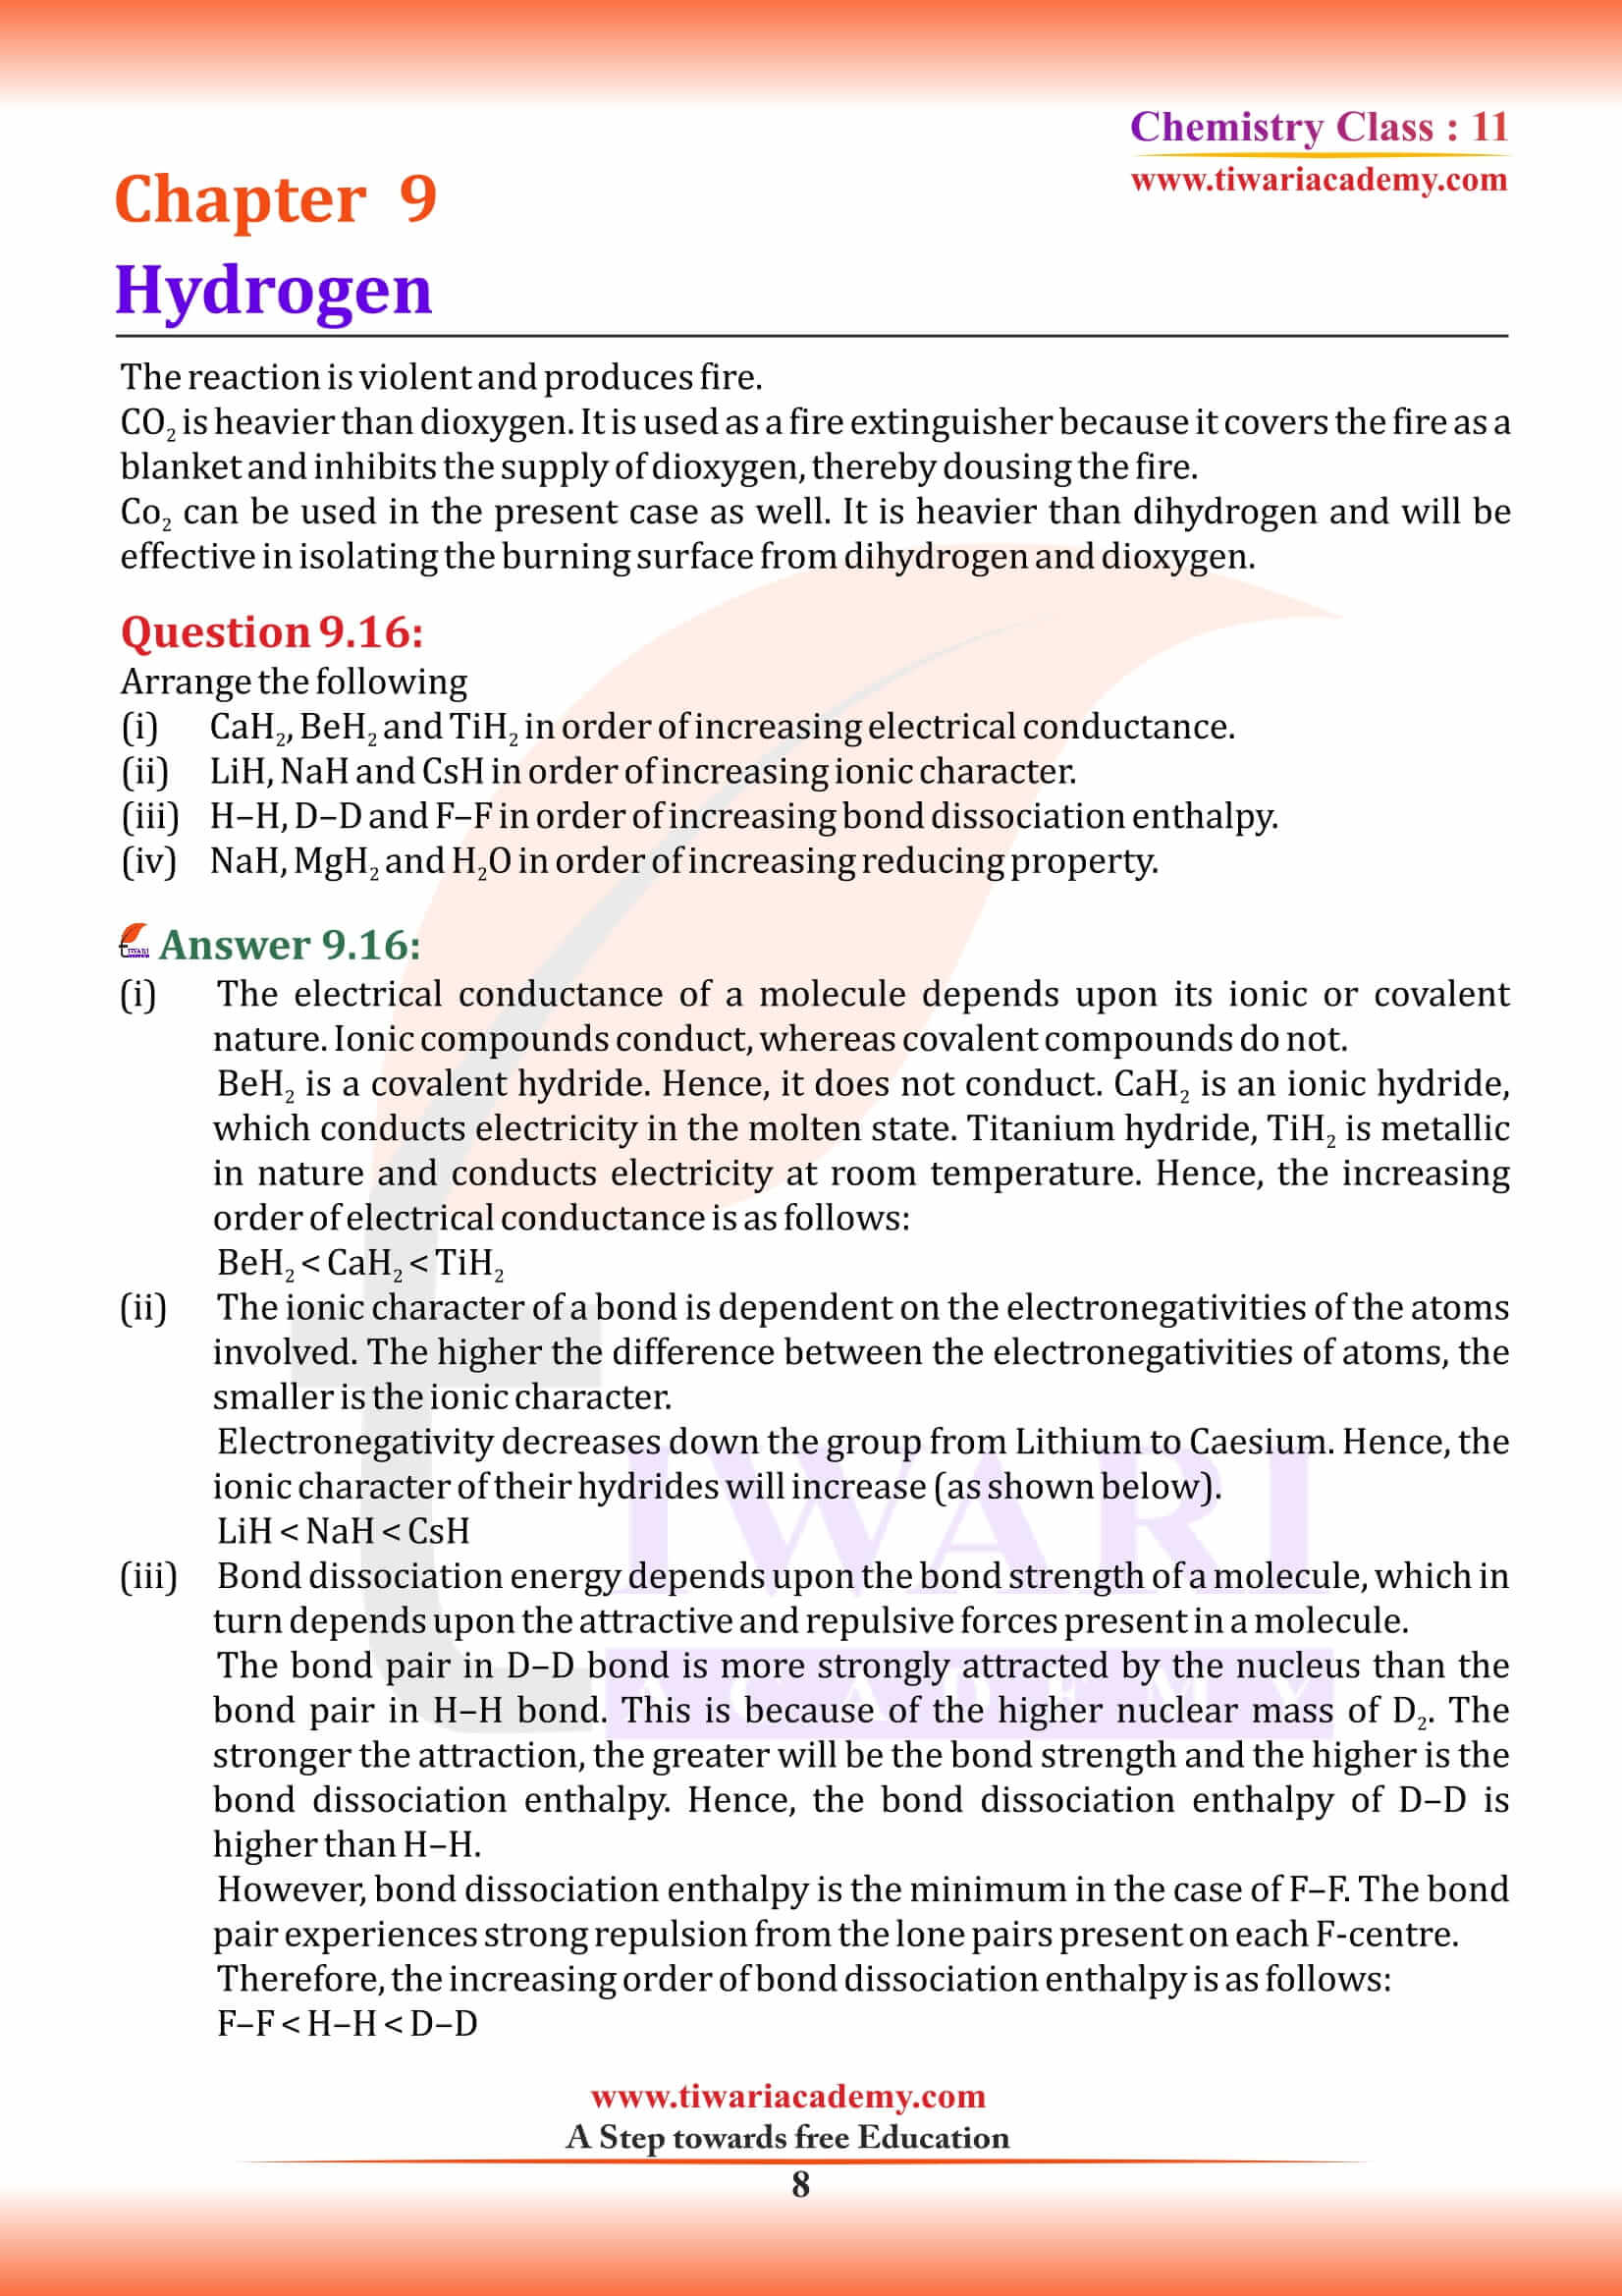 NCERT Solutions for Class 11 Chemistry Chapter 9 all answers